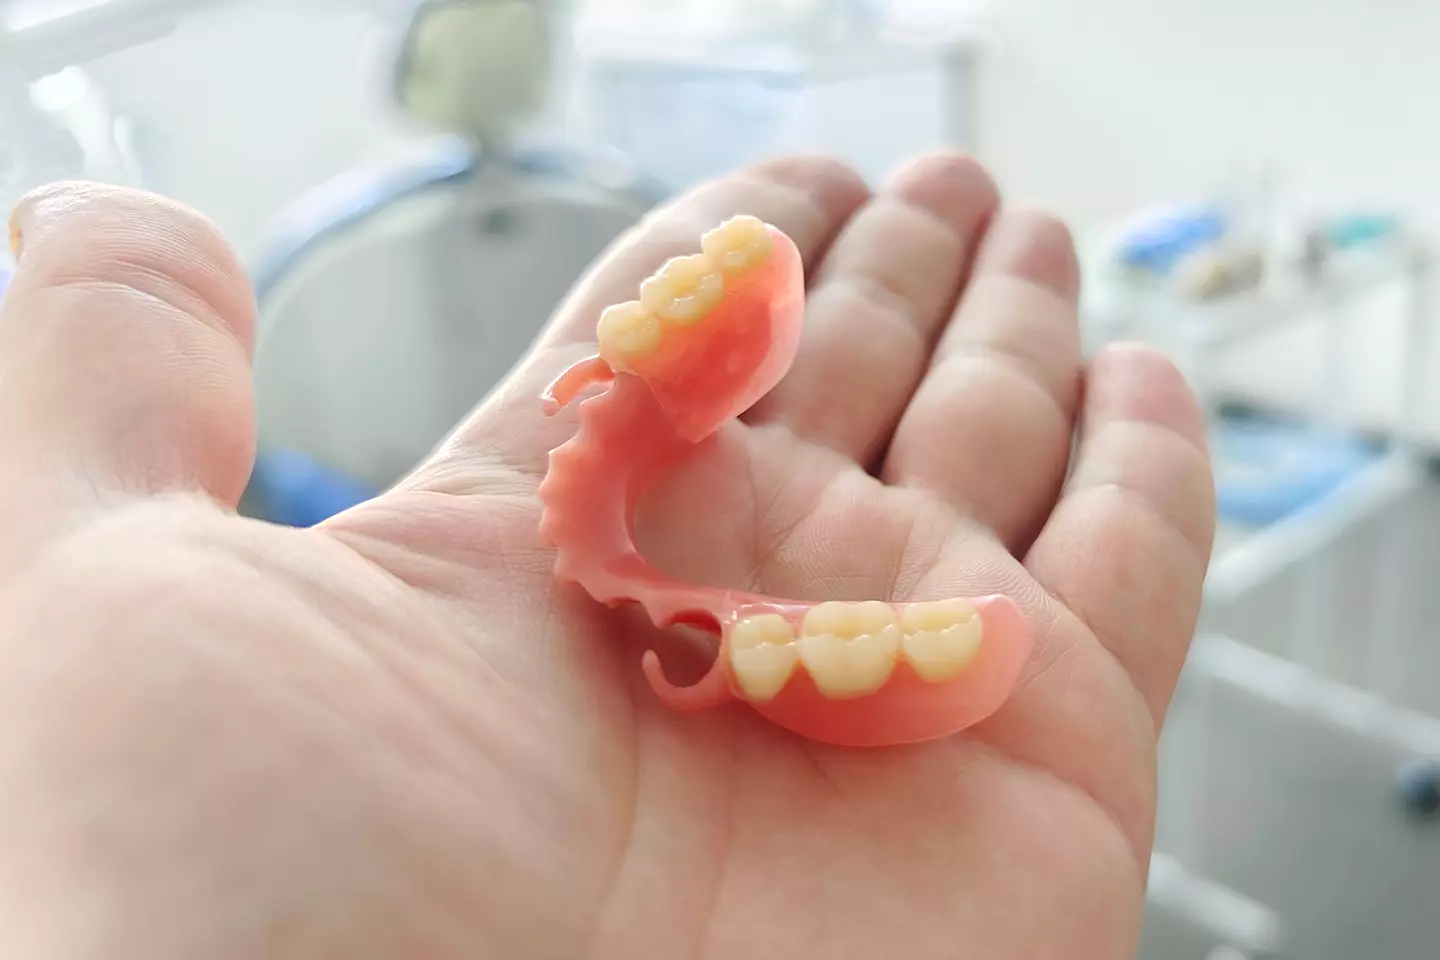 Dentures: Types, Materials And Caring